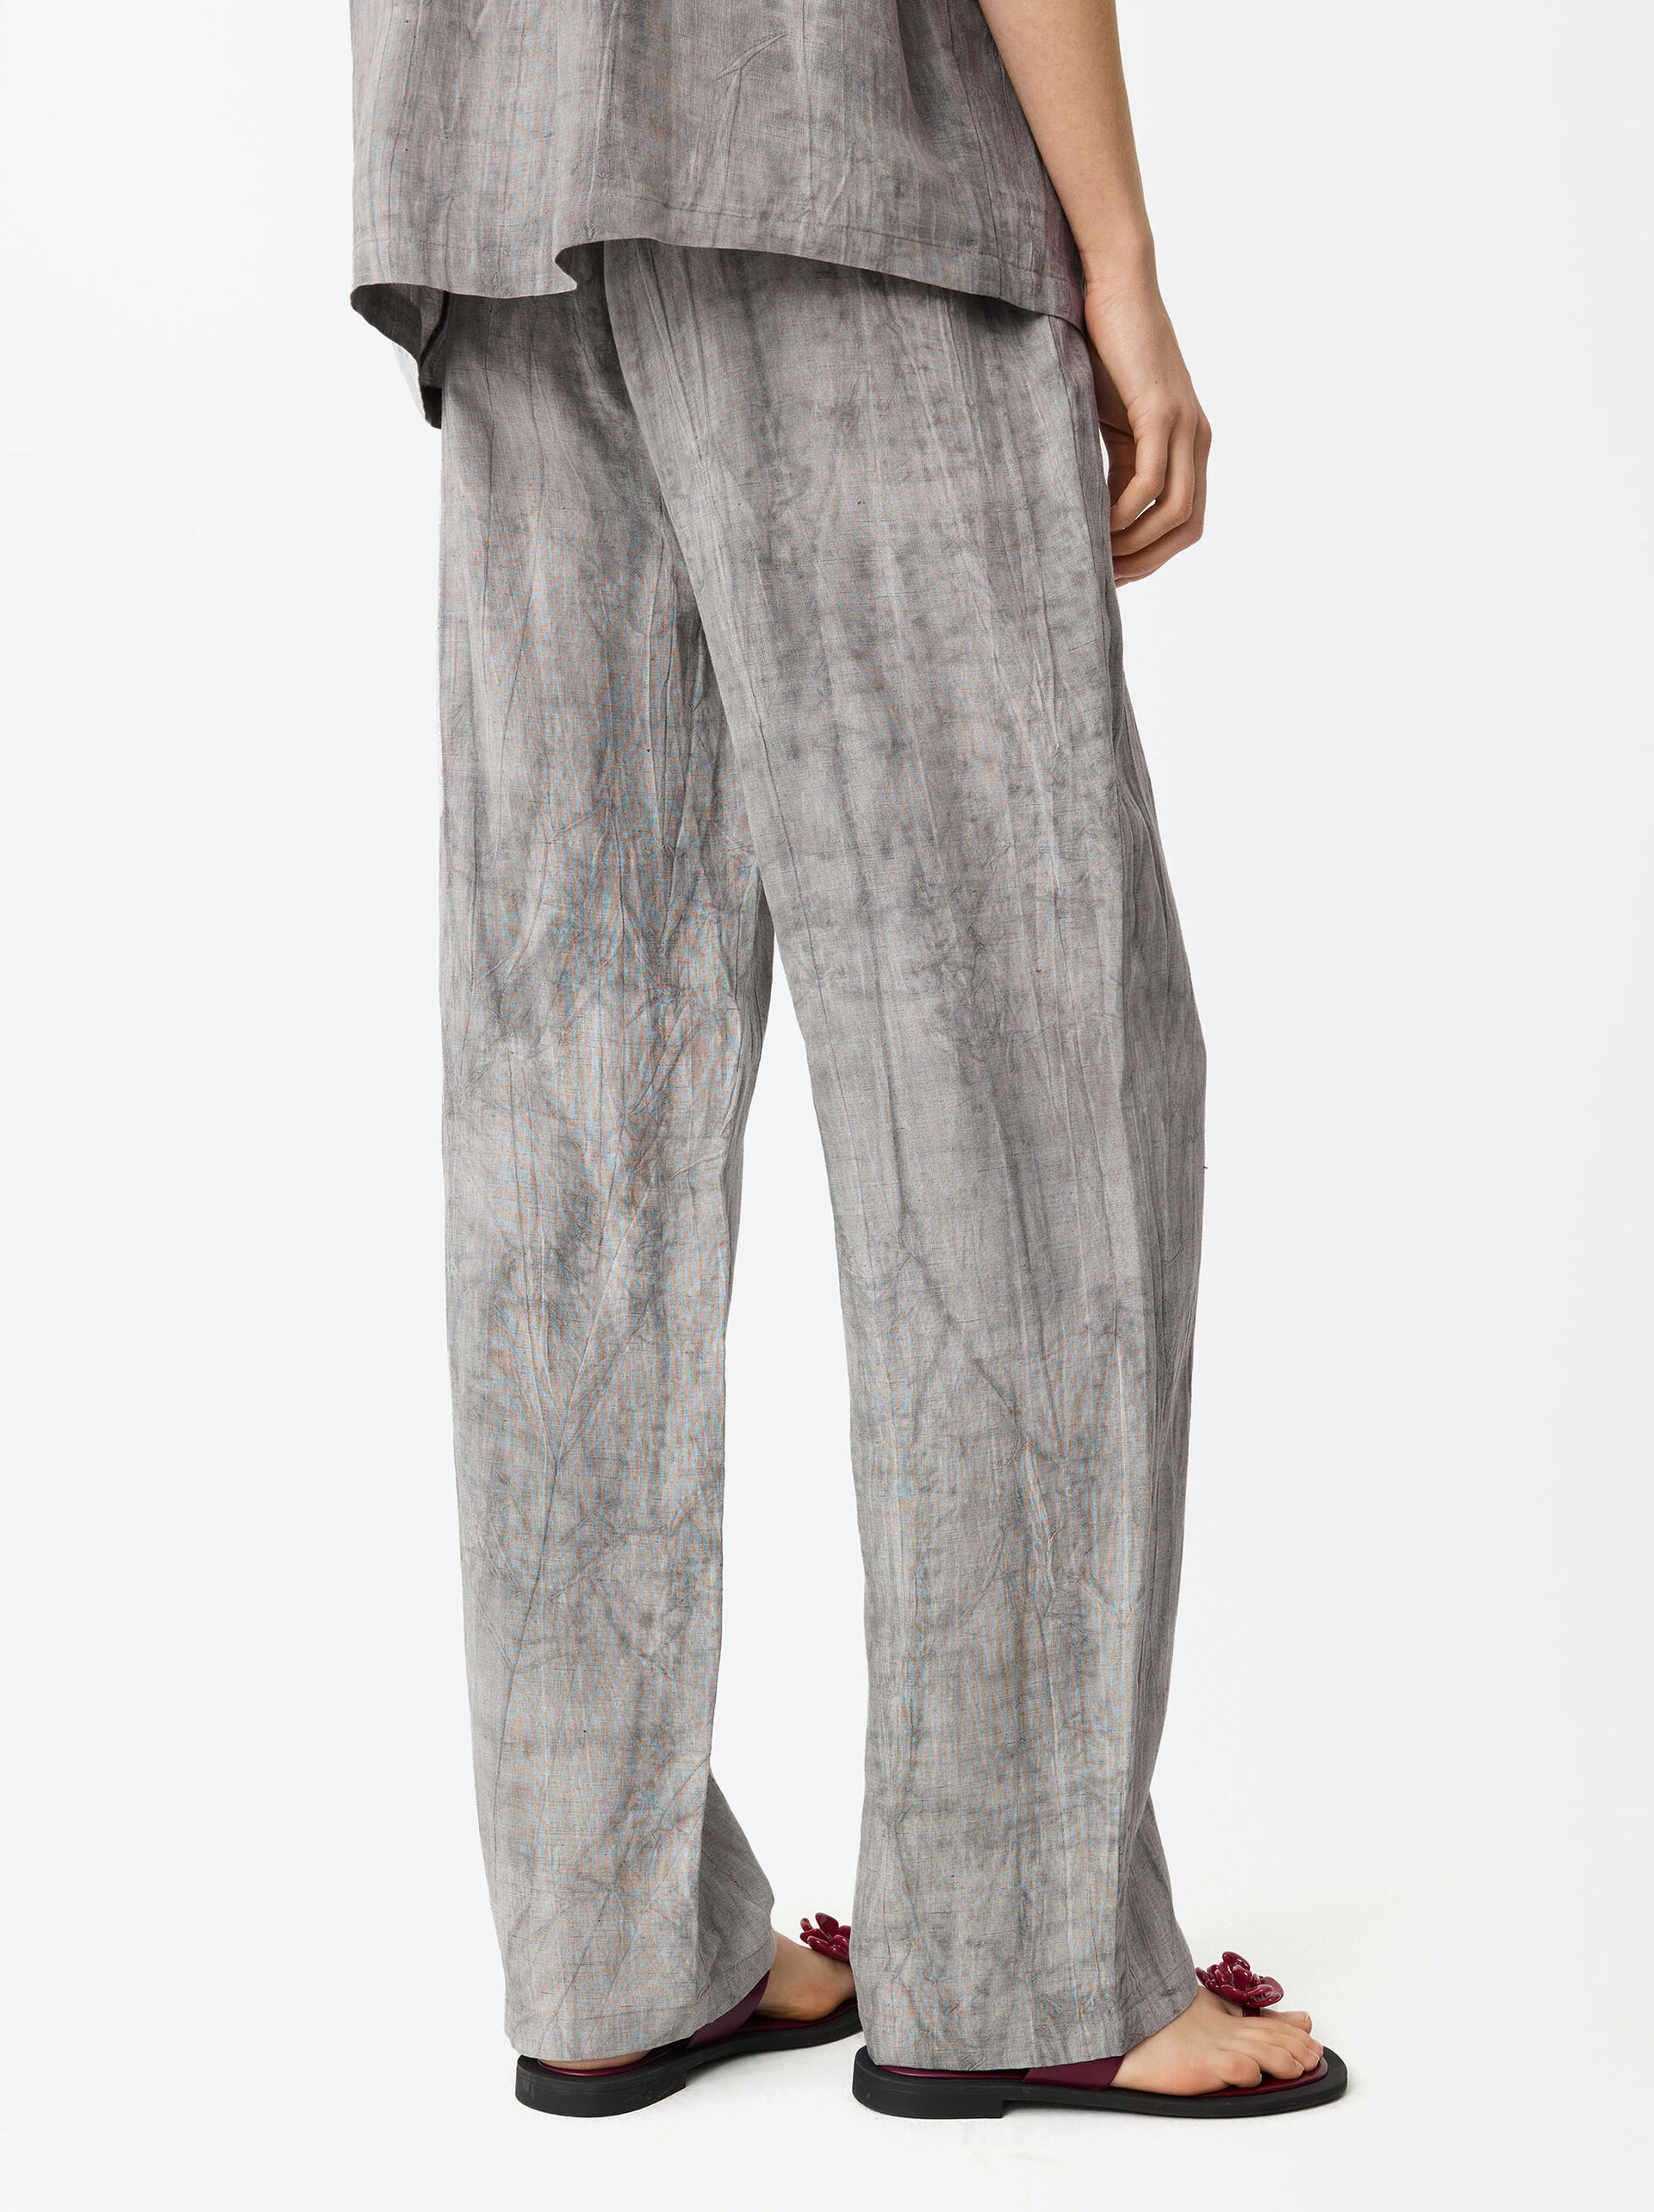 Printed Loose-Fitting Trousers image number 4.0